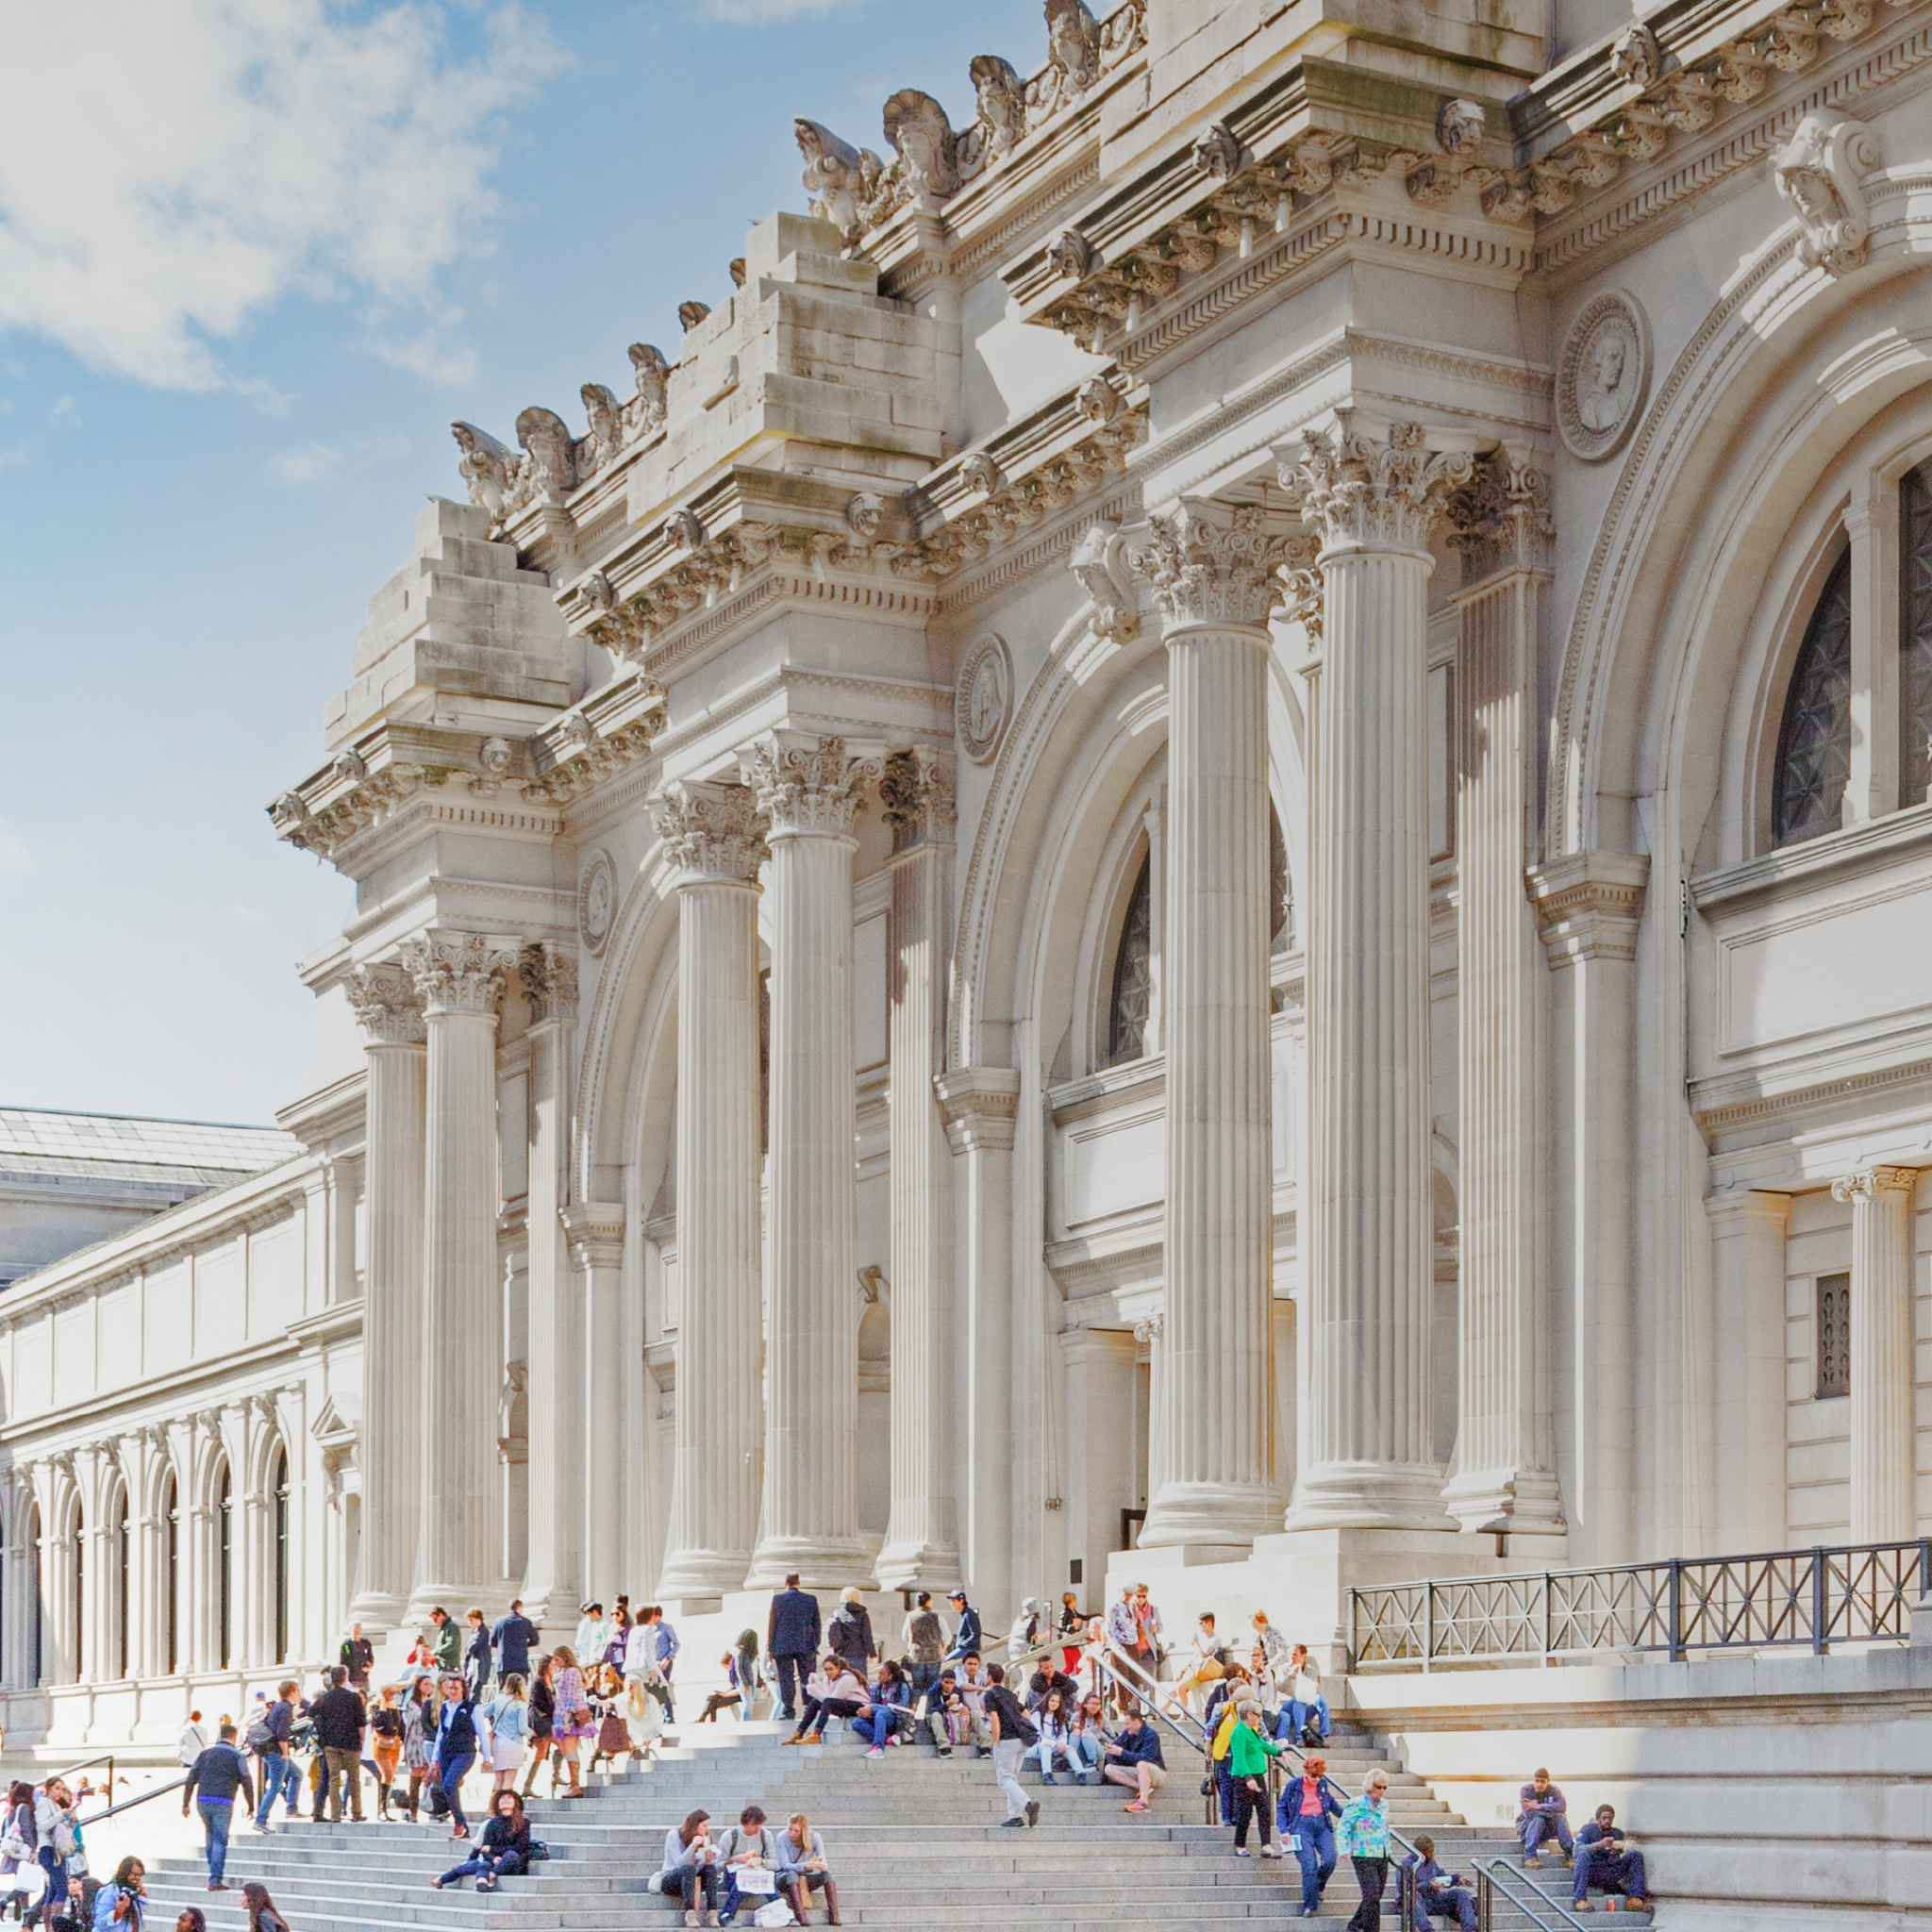 South-facing view of The Met exterior steps from the 5th Ave plaza. Sunlight hits the building facade, and the steps bustle with seated and standing visitors.